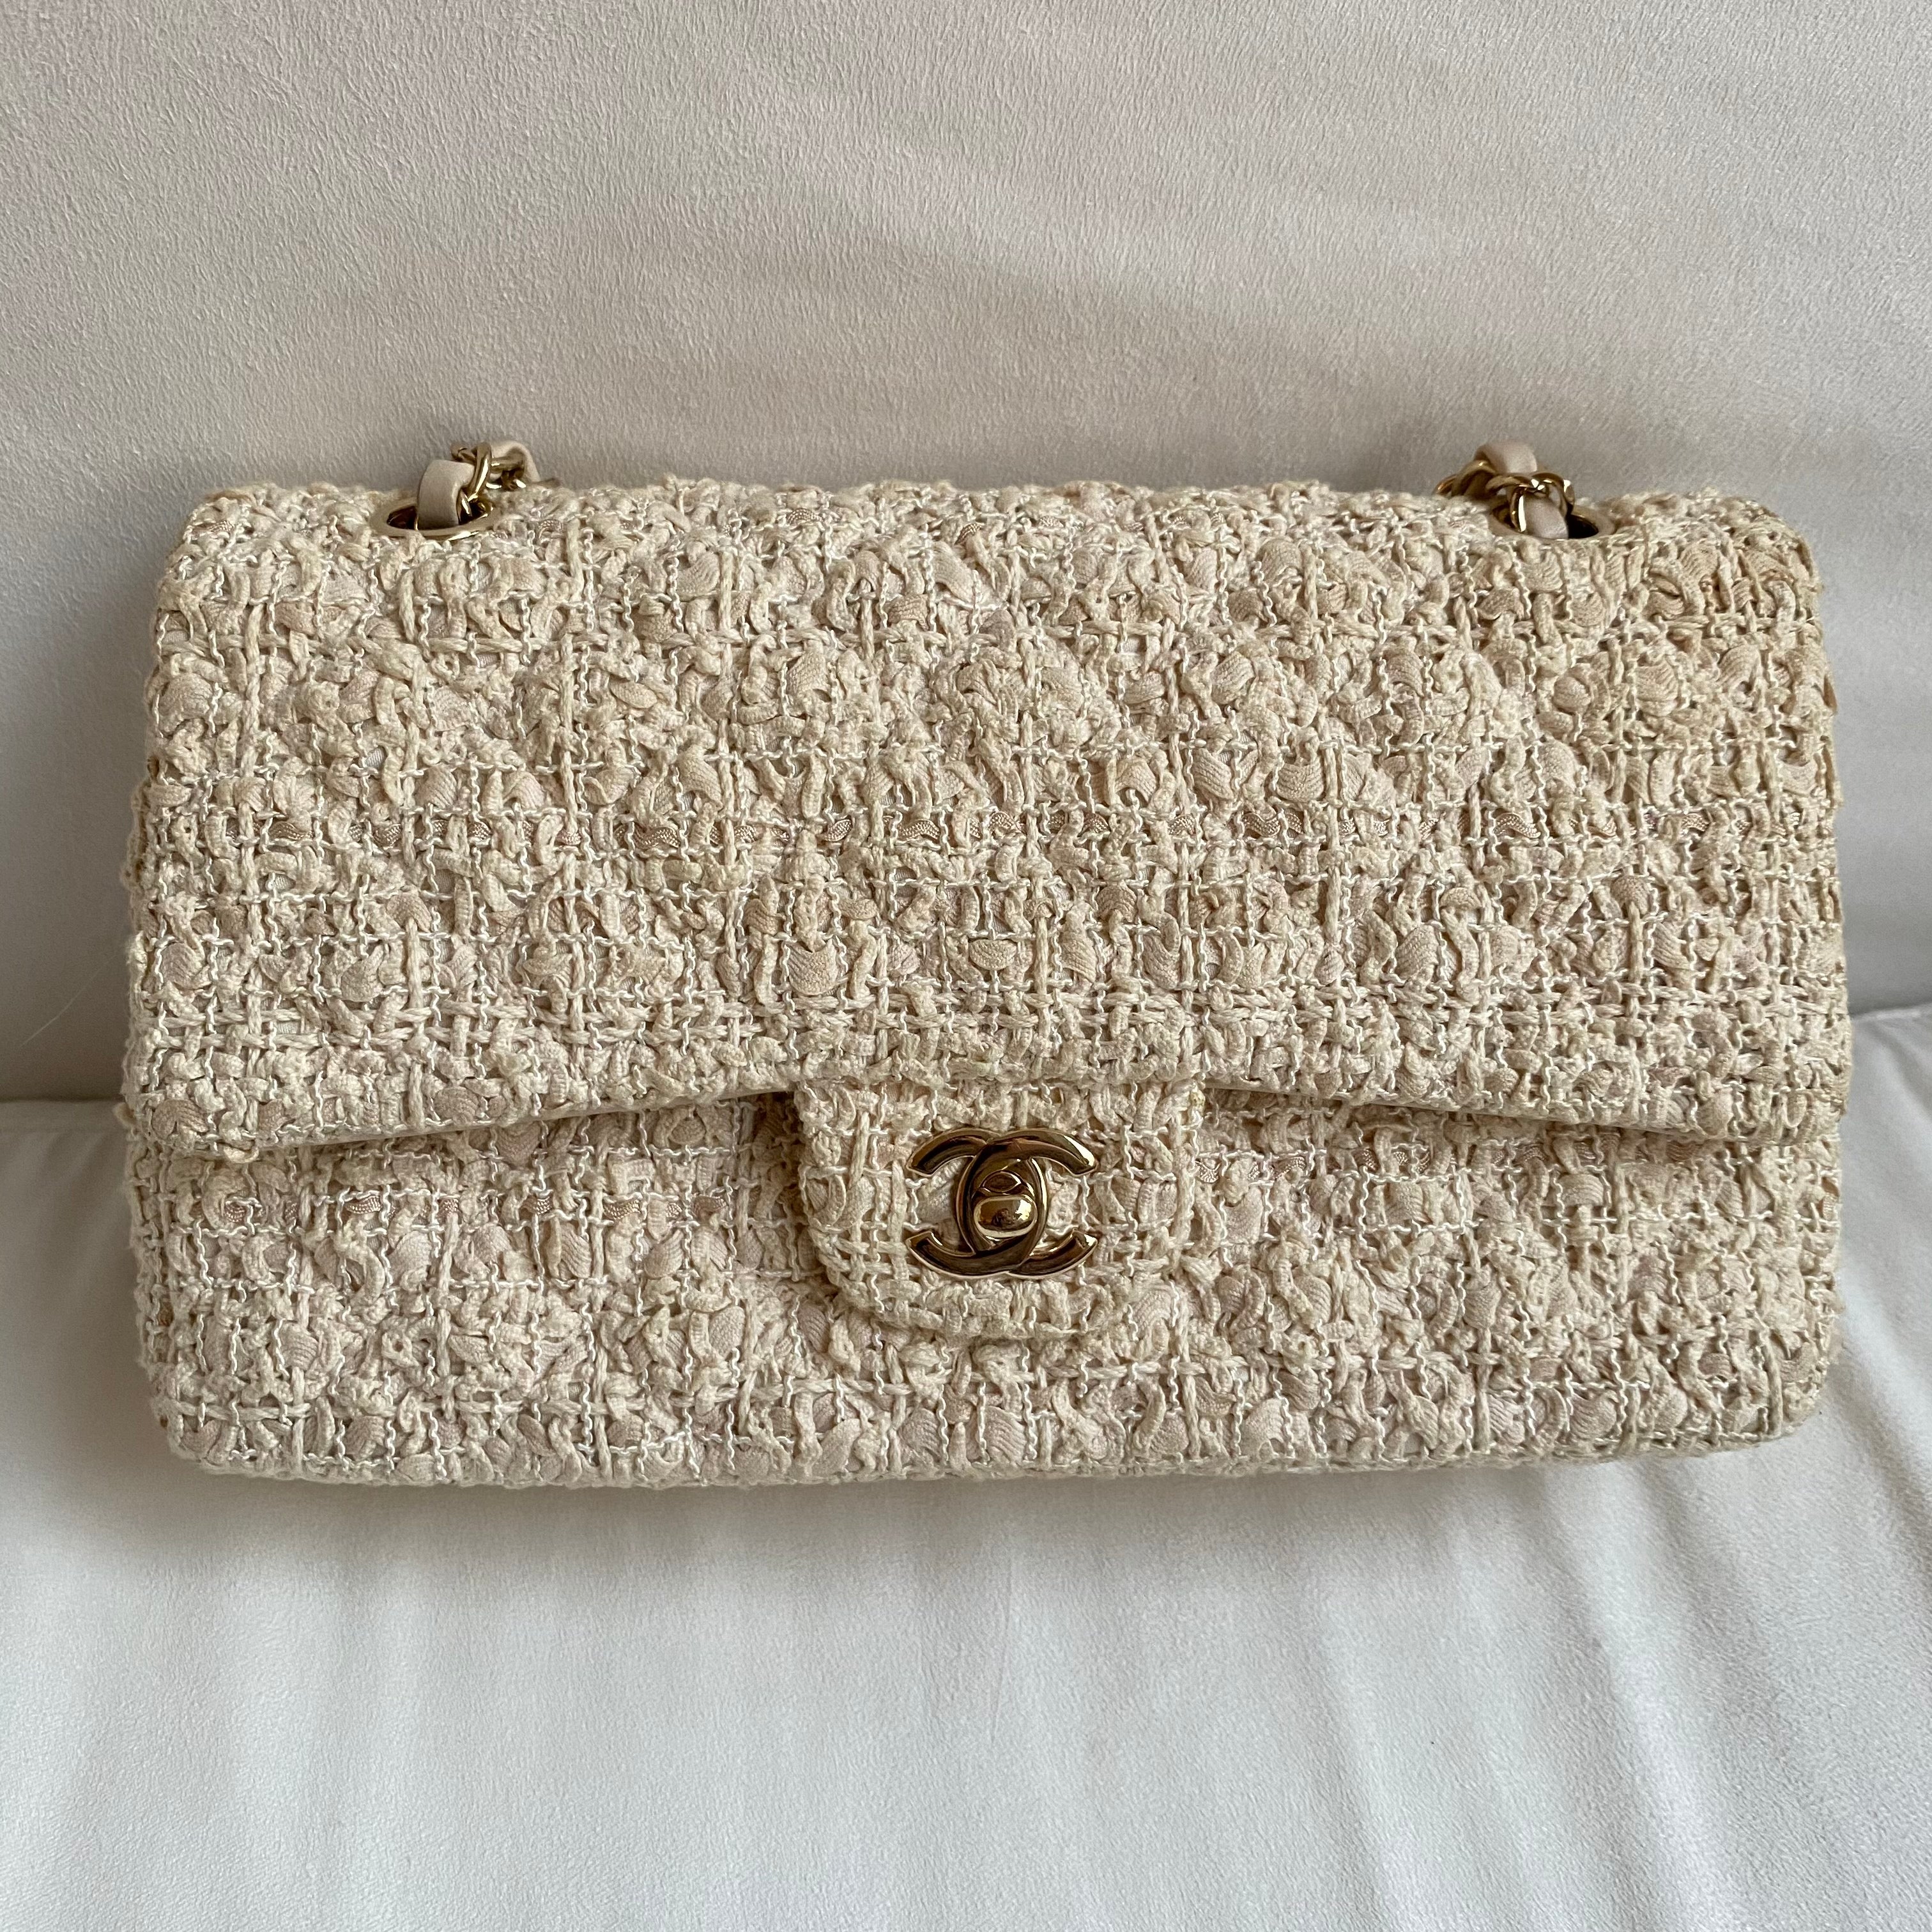 Chanel Classic Mini Rectangular 22K Pink Tweed with light gold